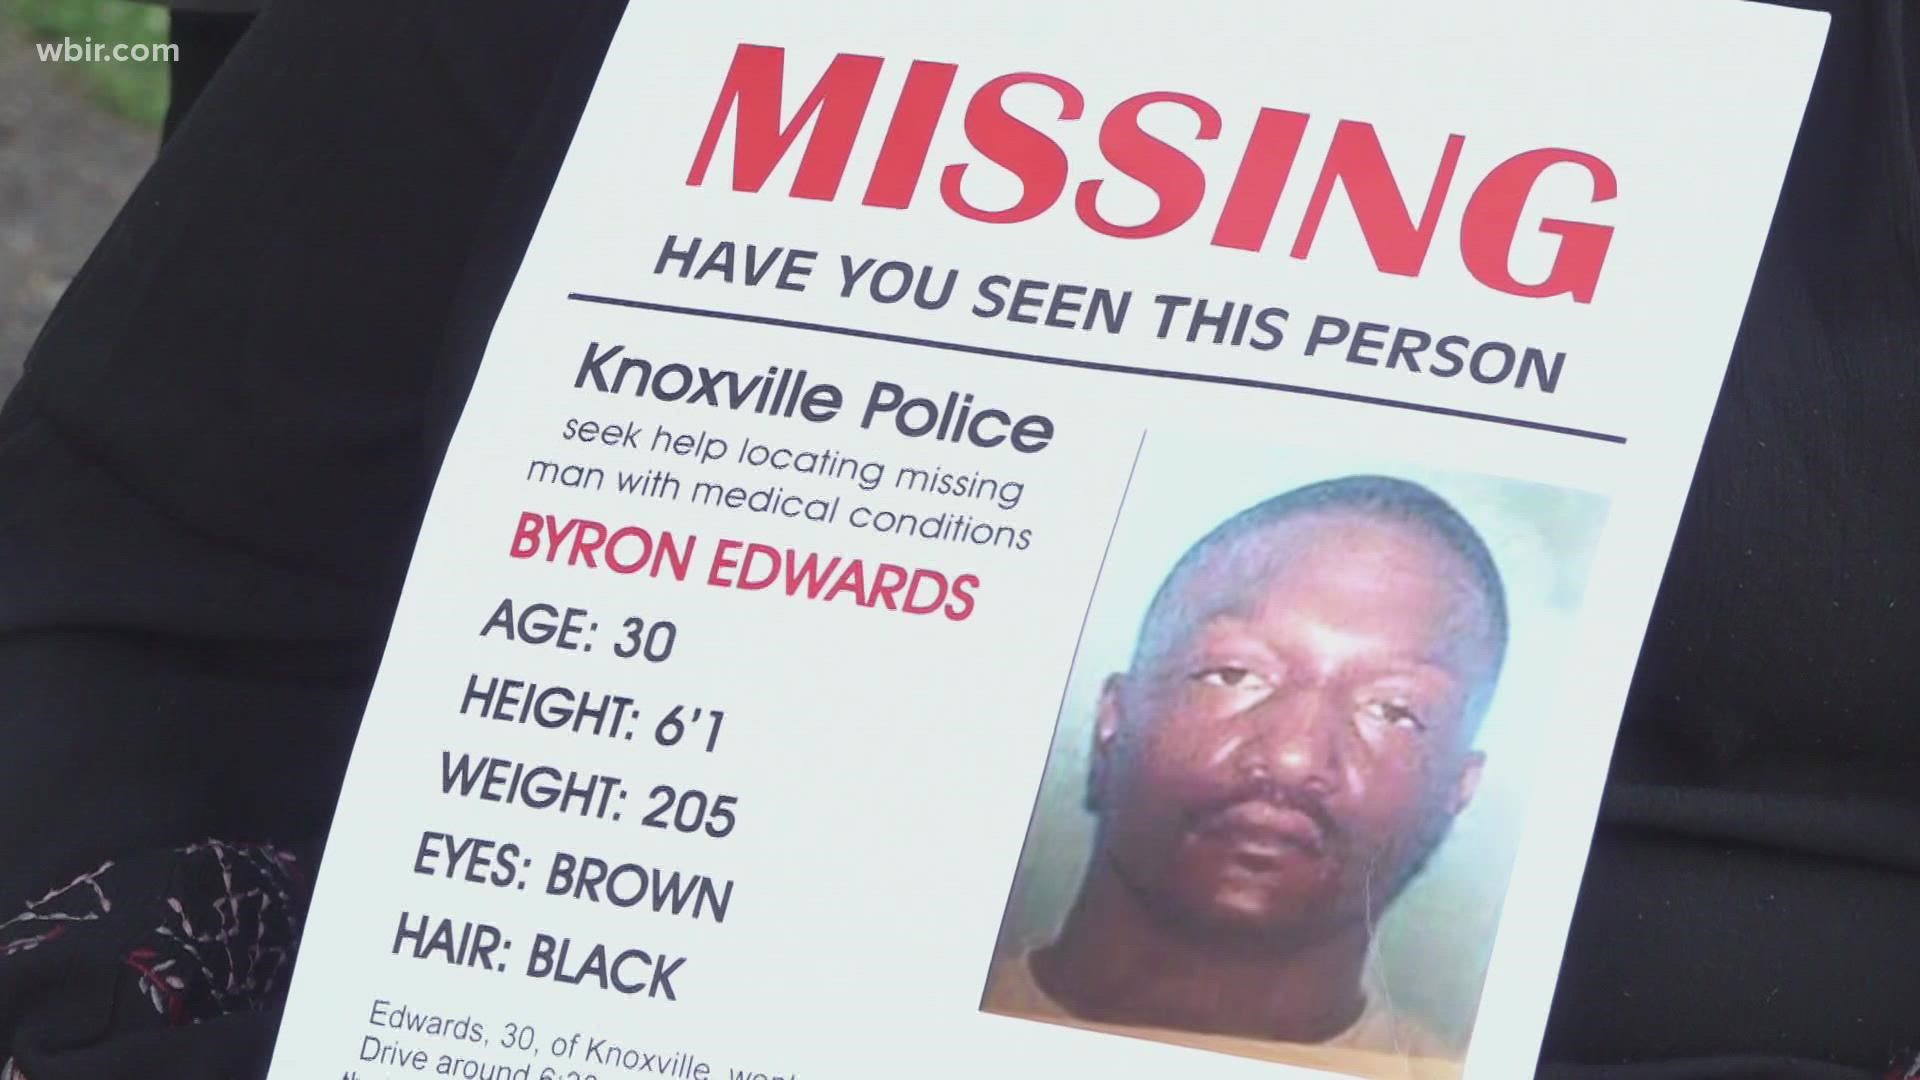 It has been one month since 30-year-old Byron Edwards disappeared in East Knoxville.